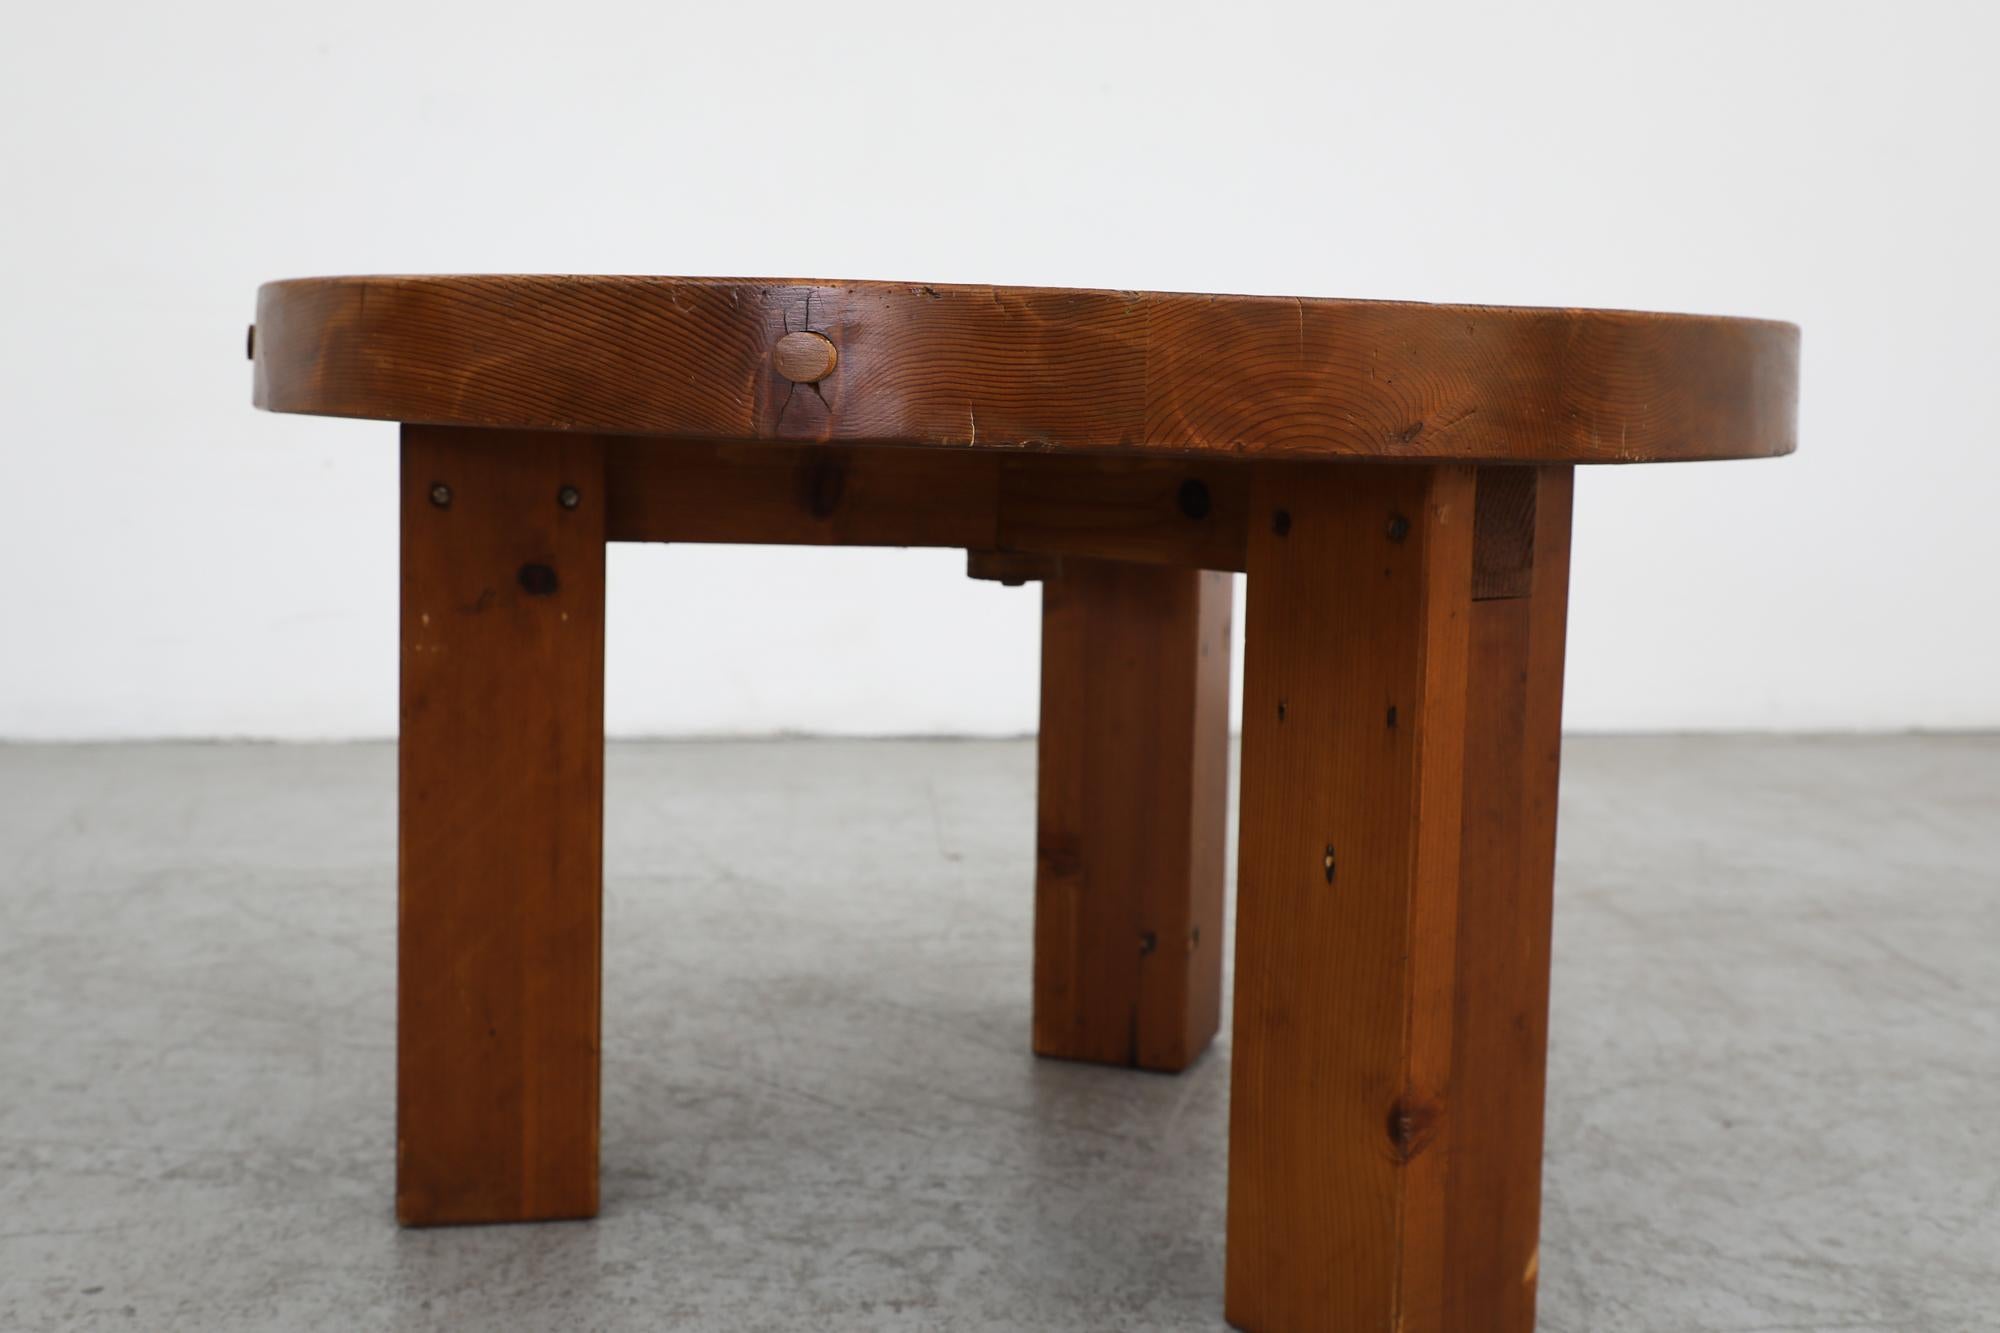 Pierre Chapo Inspired Heavy Pine Brutalist Side Table w/ Round Top & Square Legs For Sale 4